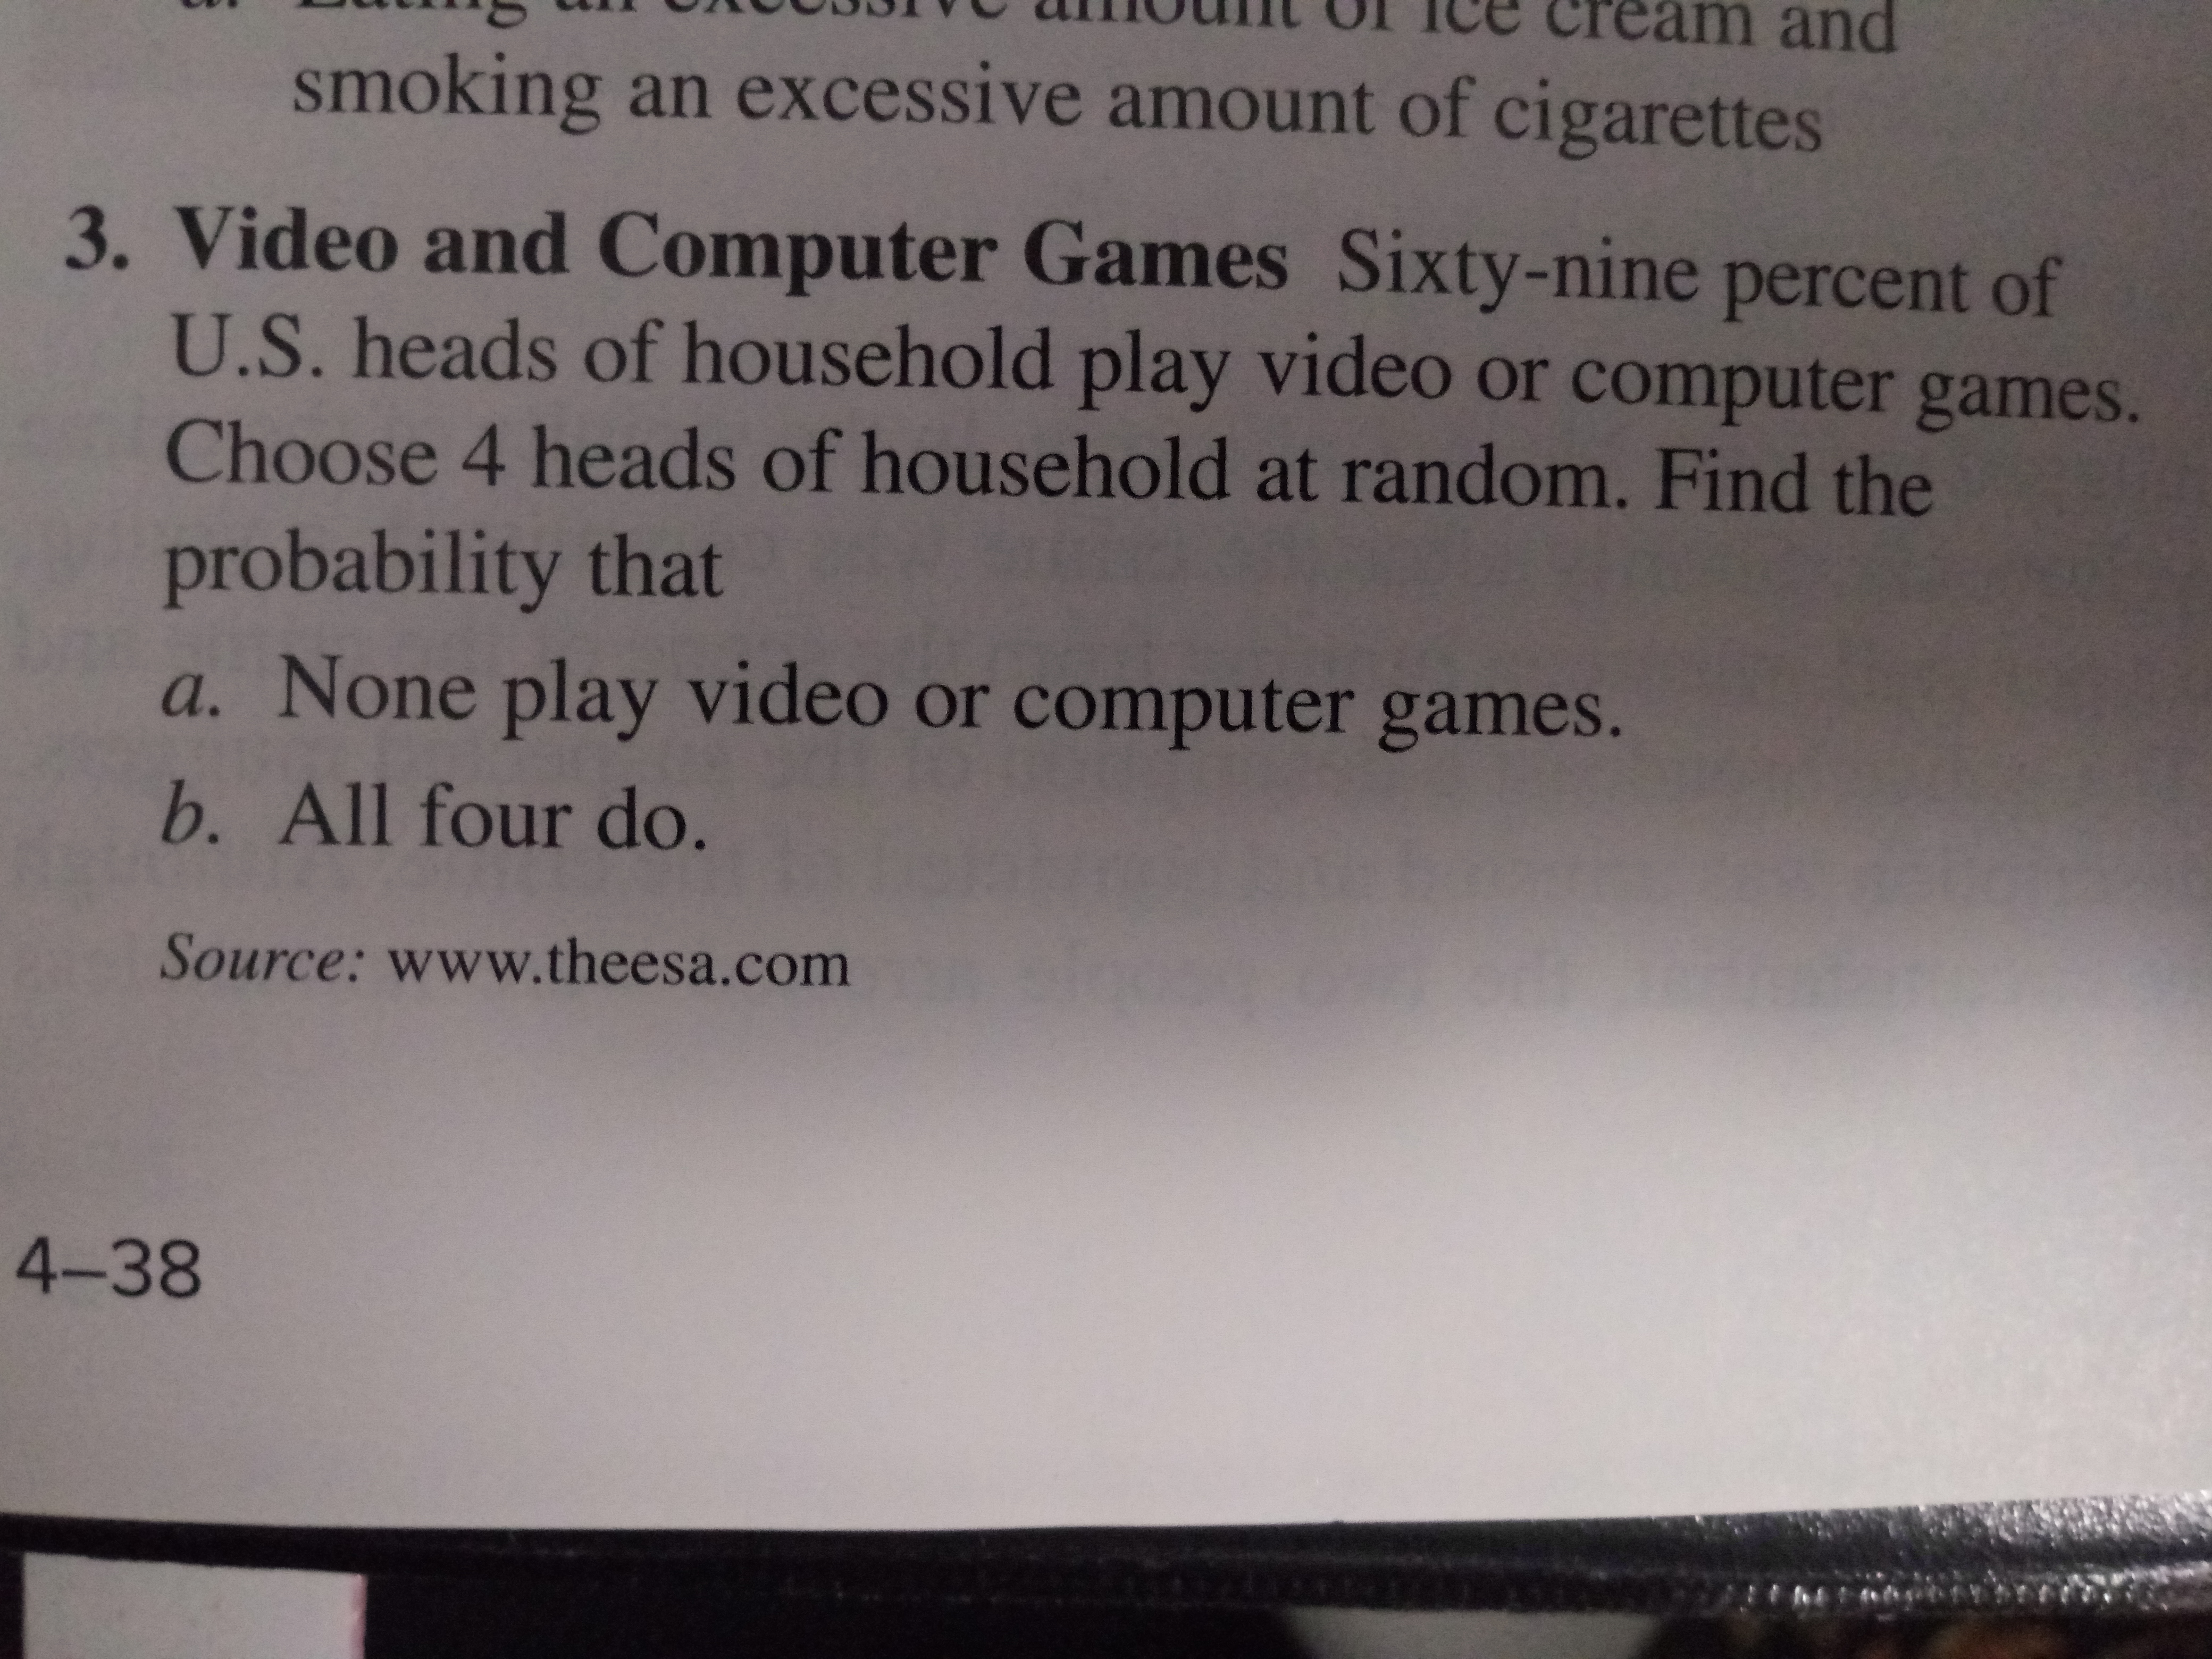 Cream and
smoking an excessive amount of cigarettes
3. Video and Computer Games Sixty-nine percent of
U.S. heads of household play video or computer games.
Choose 4 heads of household at random. Find the
probability that
a. None play video or computer games.
b. All four do.
Source: www.theesa.com
4-38
